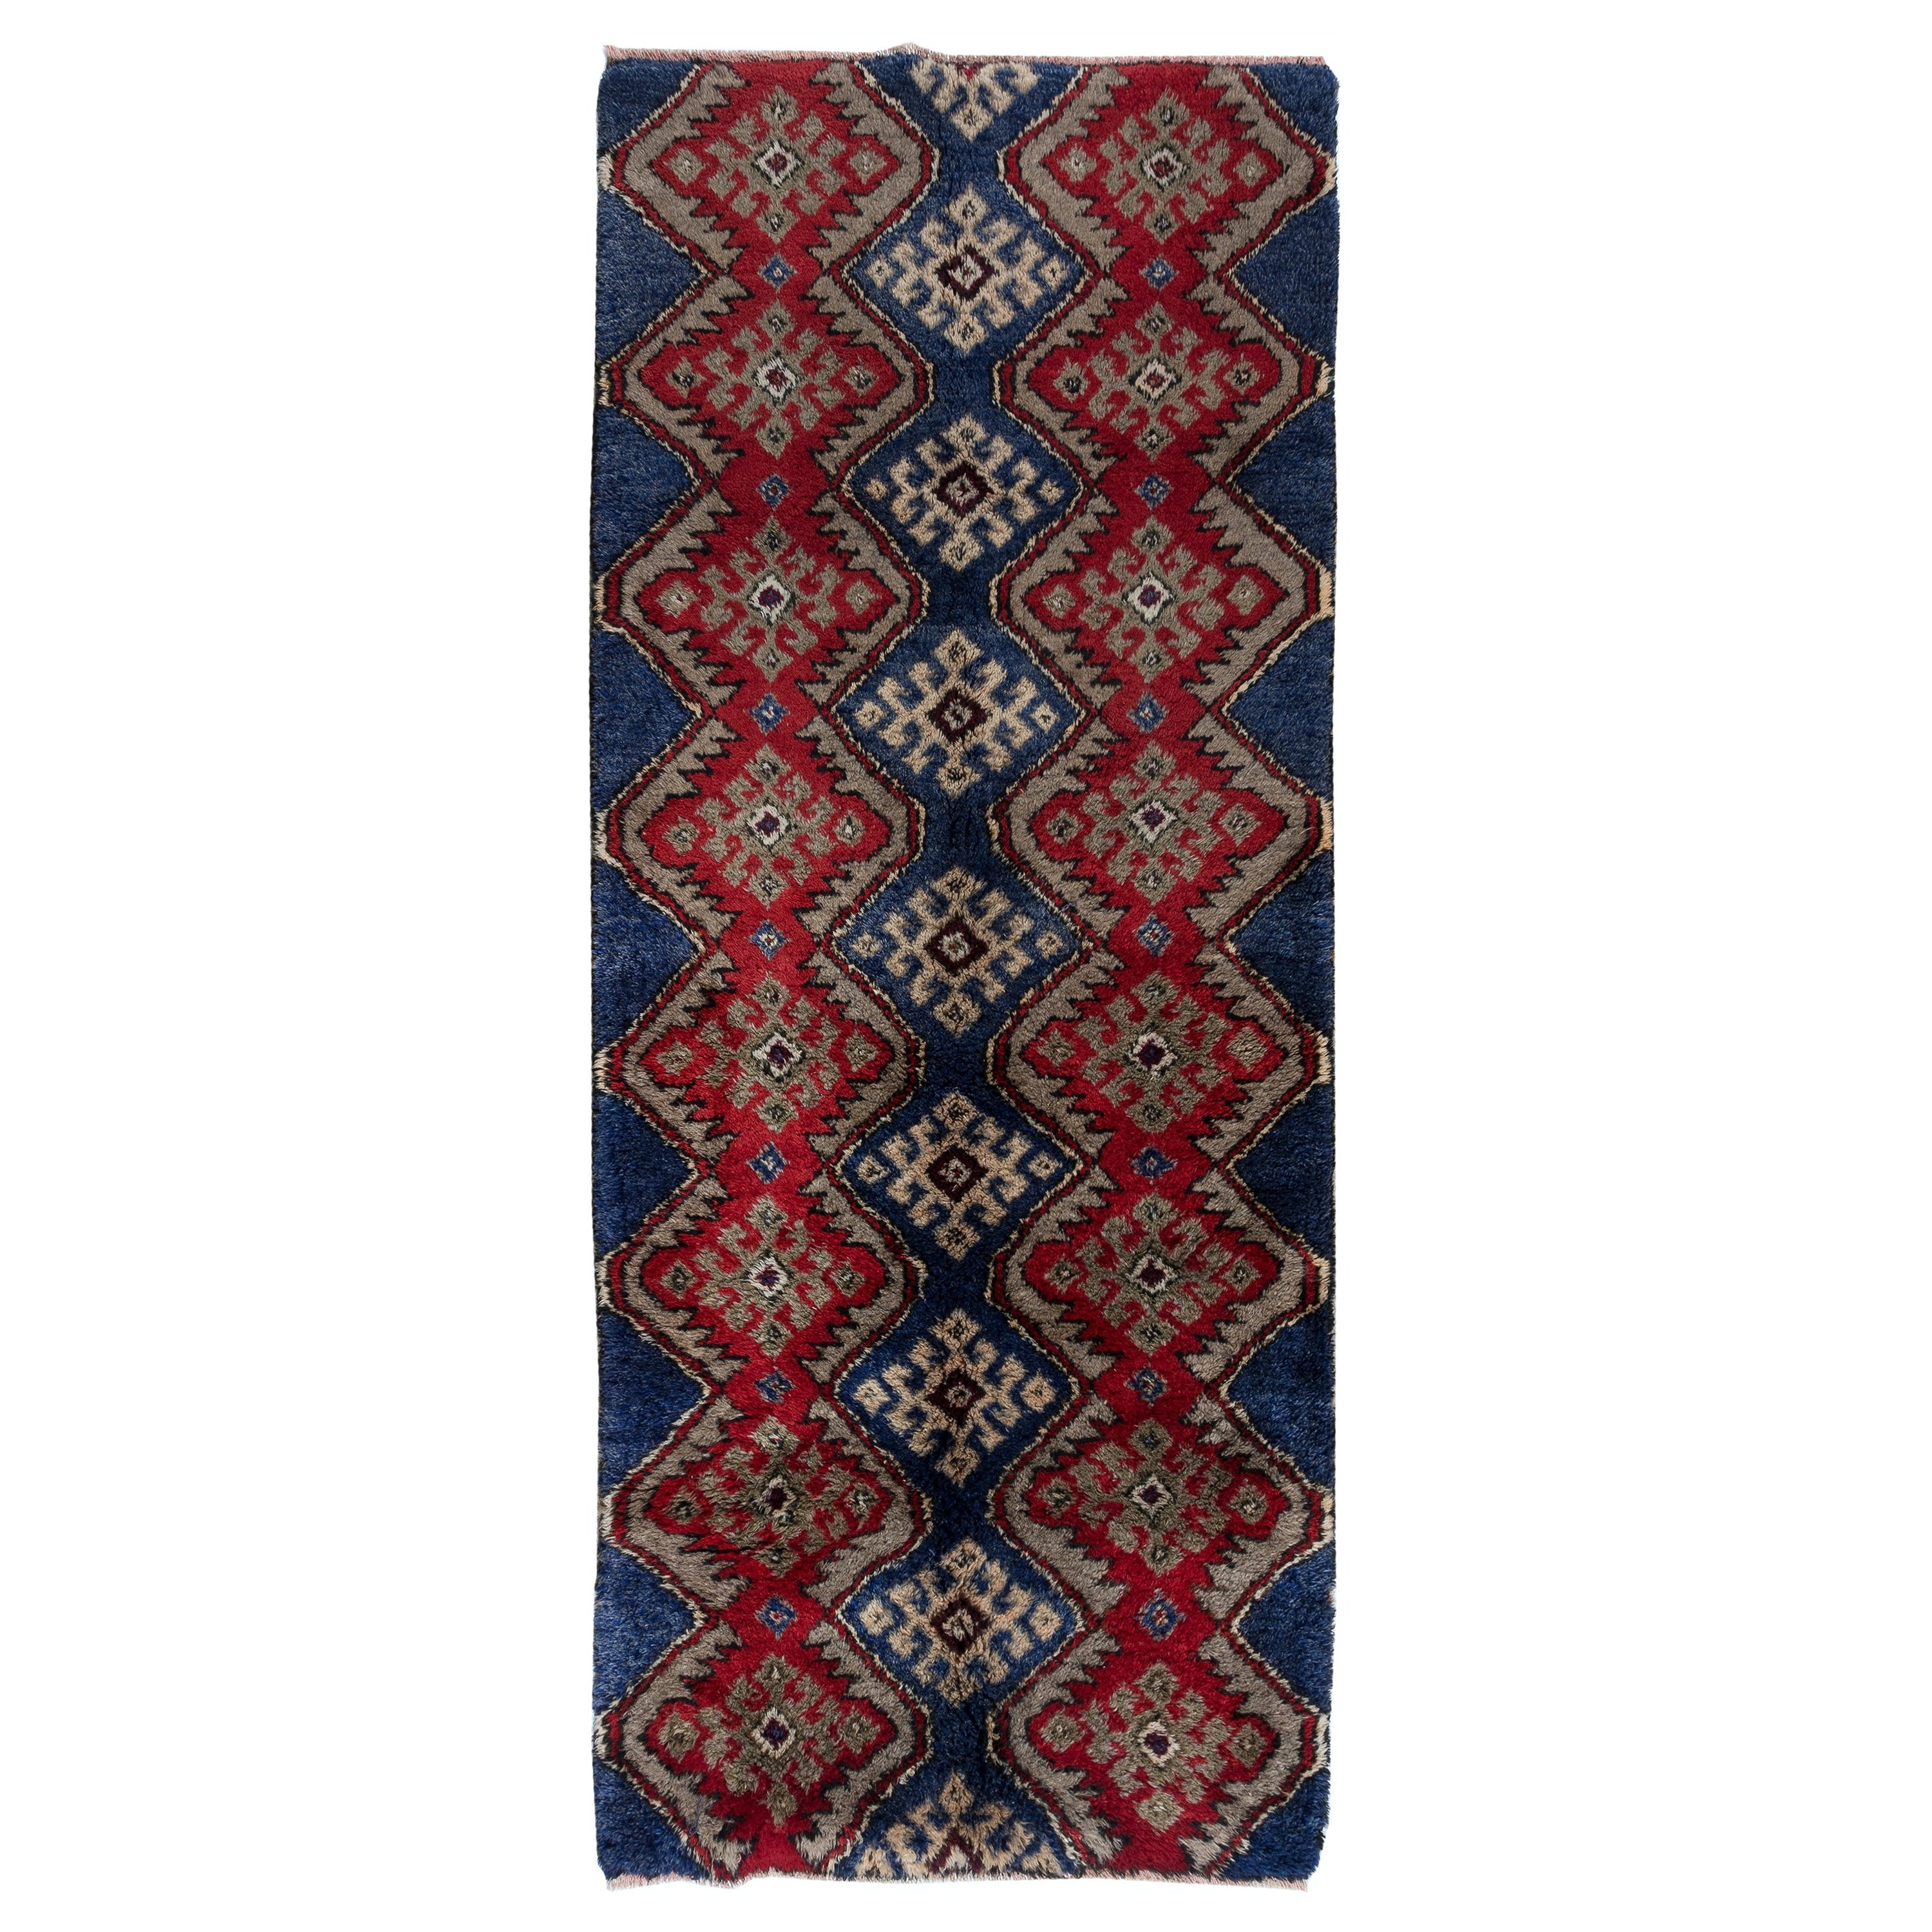 3.5x8.4 Ft Vintage Hand Knotted "Tulu" Rug in Blue, Red & Light Brown. 100% Wool